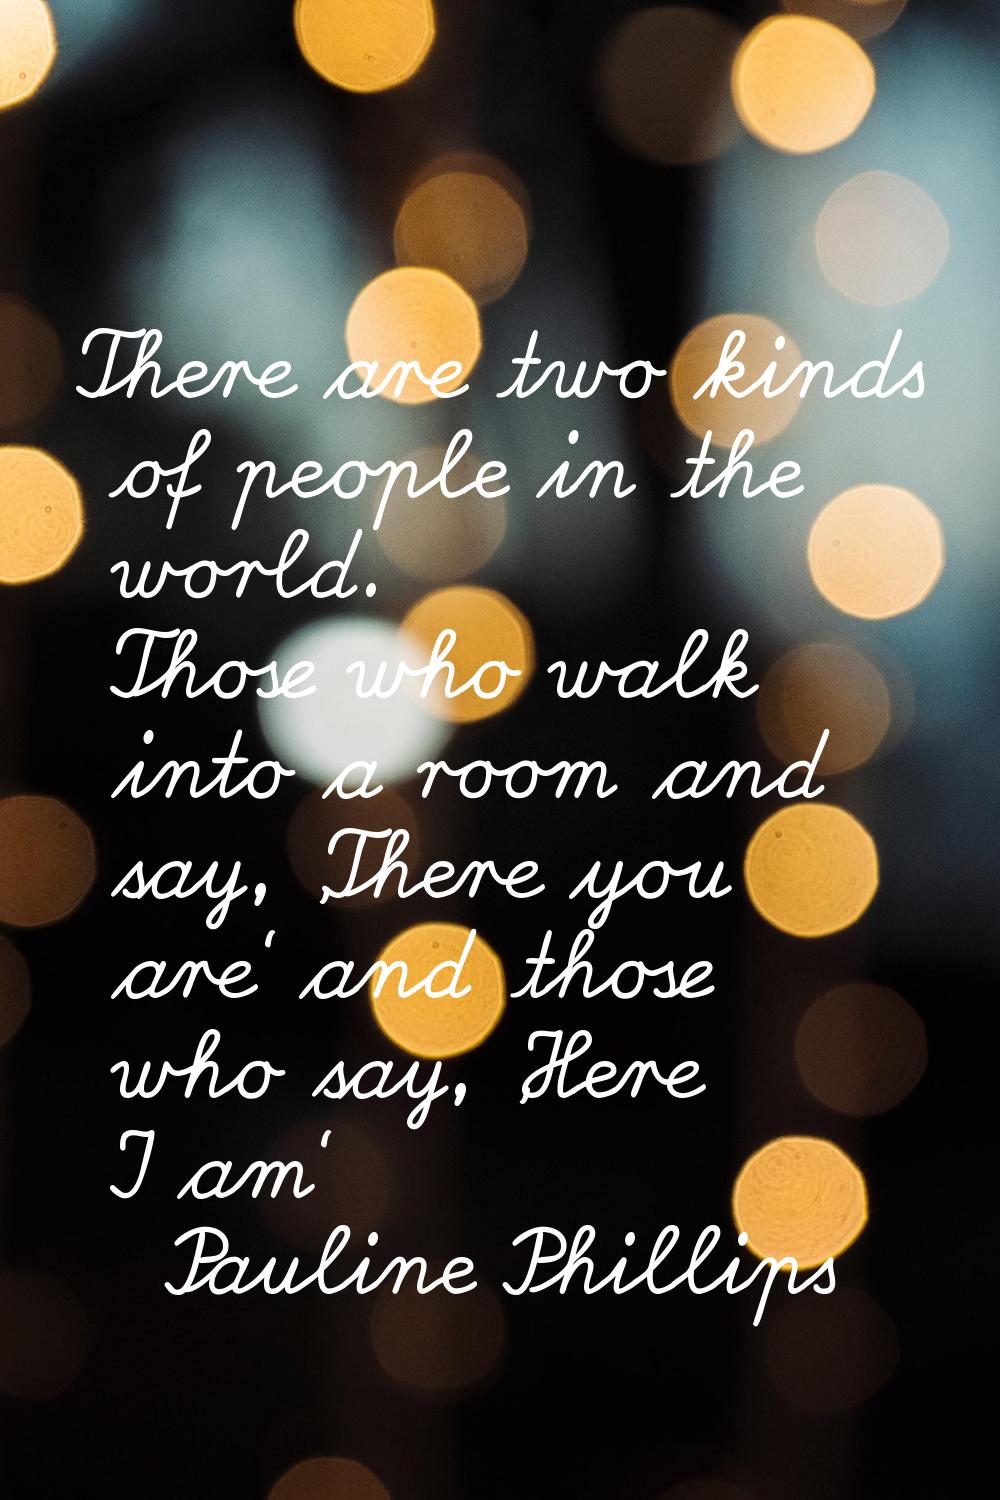 There are two kinds of people in the world. Those who walk into a room and say, 'There you are' and